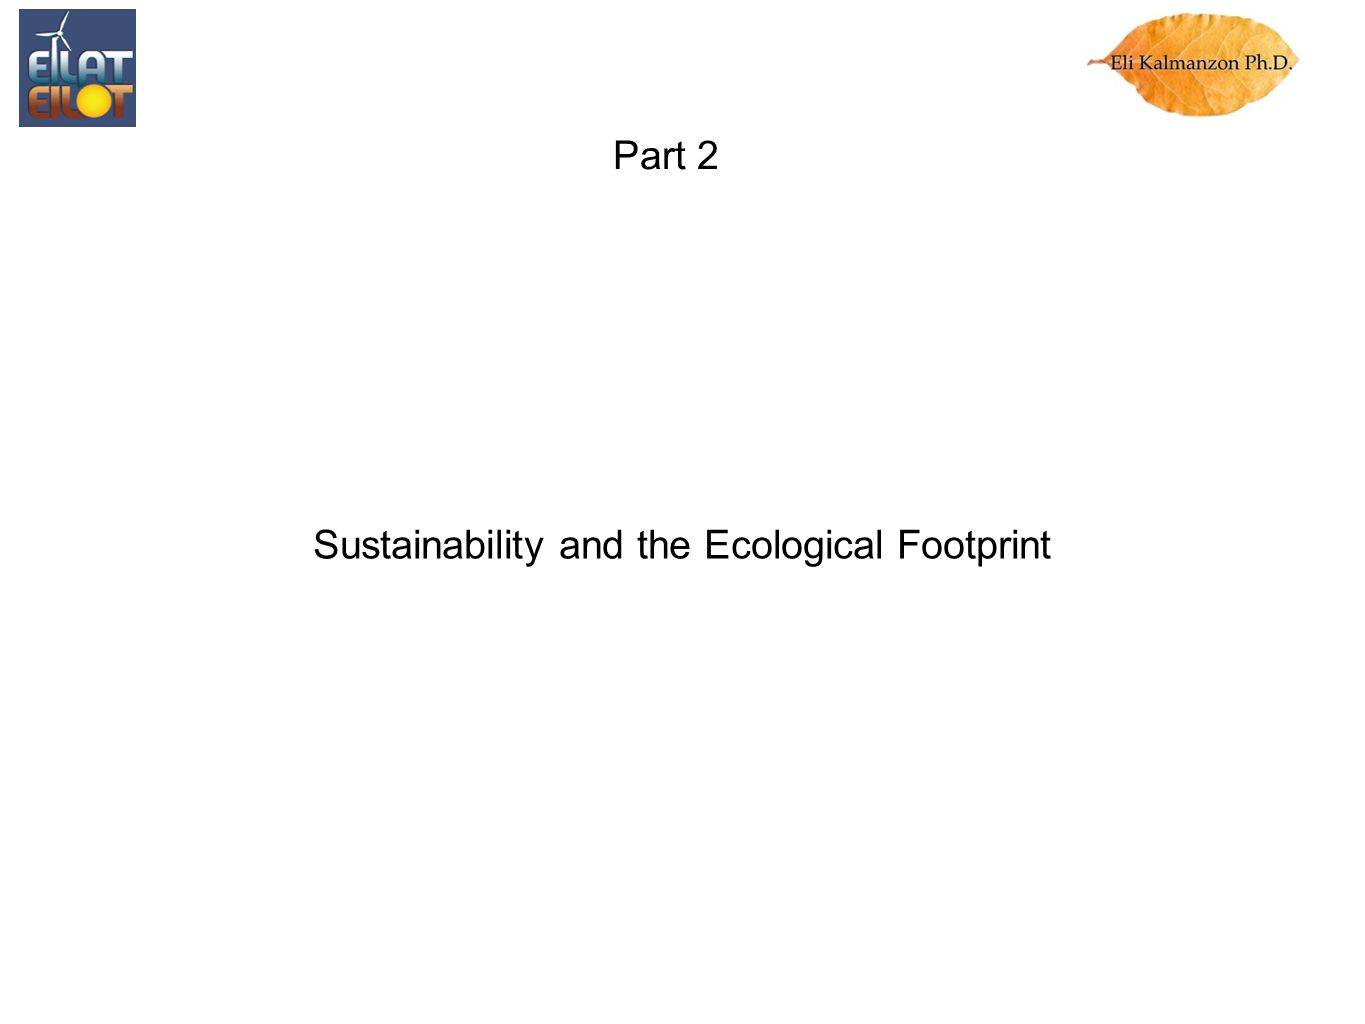 Part 2 Sustainability and the Ecological Footprint